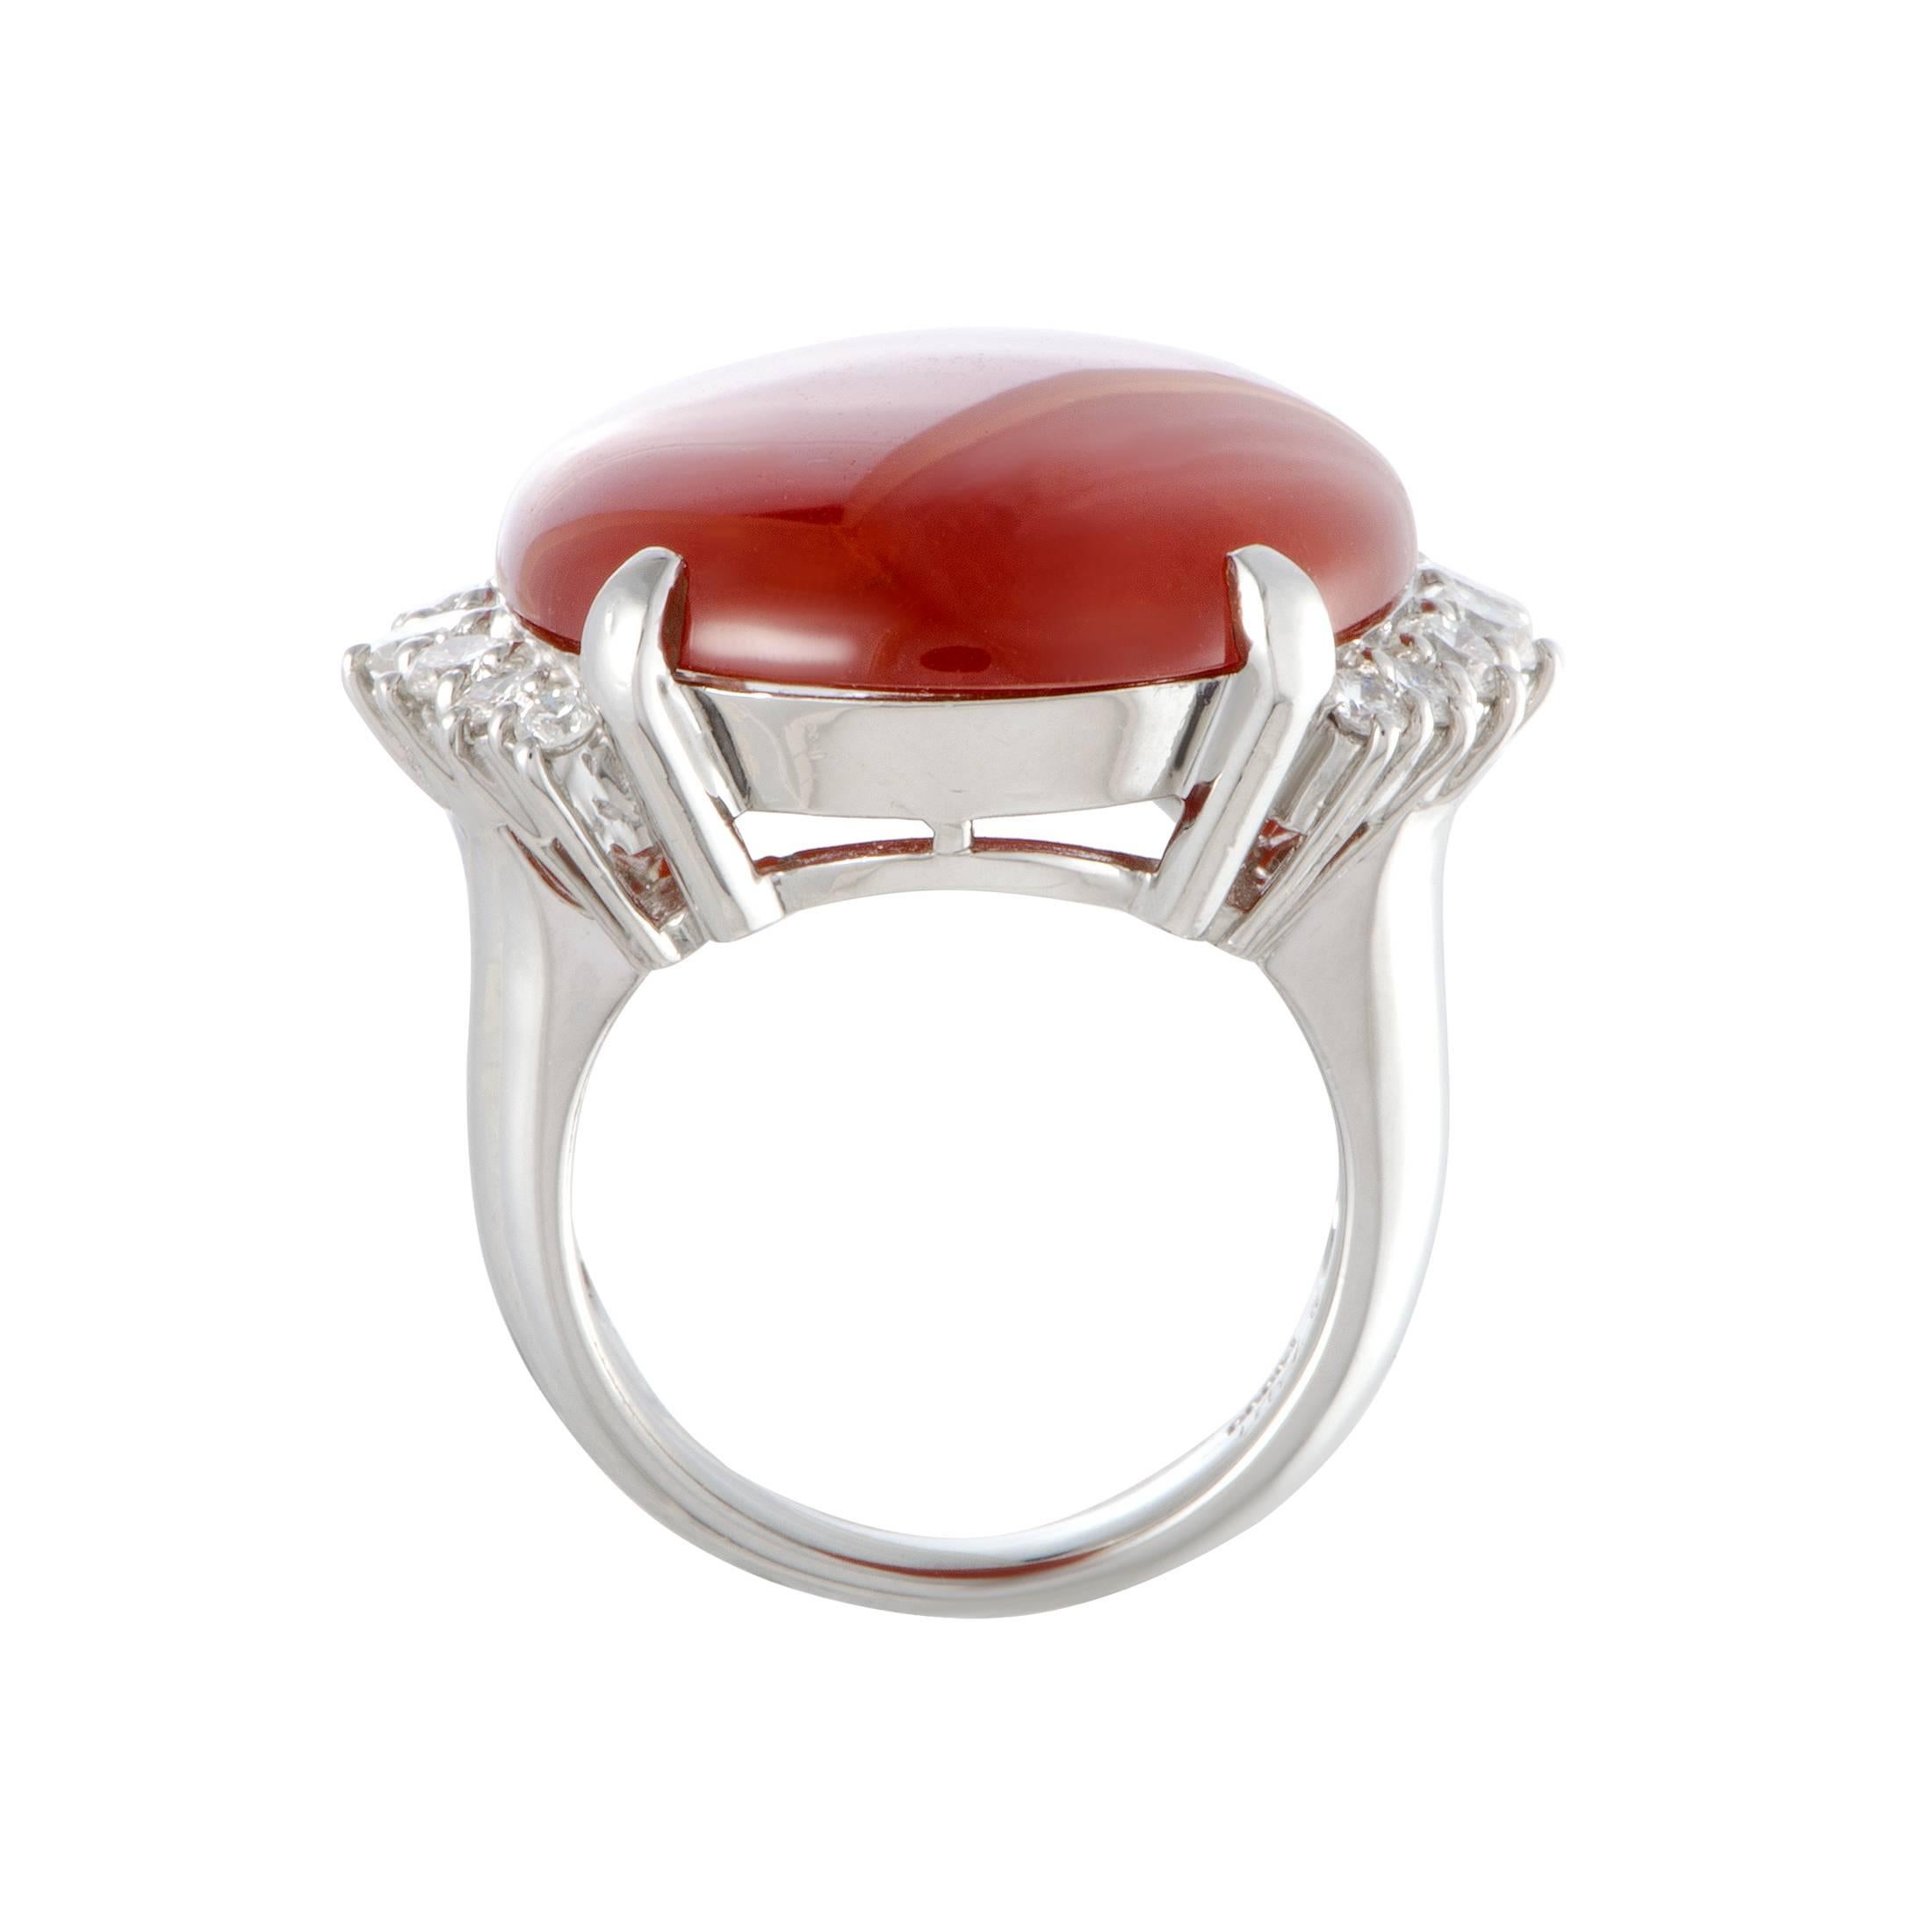 The eye-catching red jade adds a nice touch of color to this marvelously designed ring that is expertly crafted from luxurious platinum. The ring is also set with 0.90 carats of diamond stones, while the jade weighs 27.91 carats.
Ring Size: